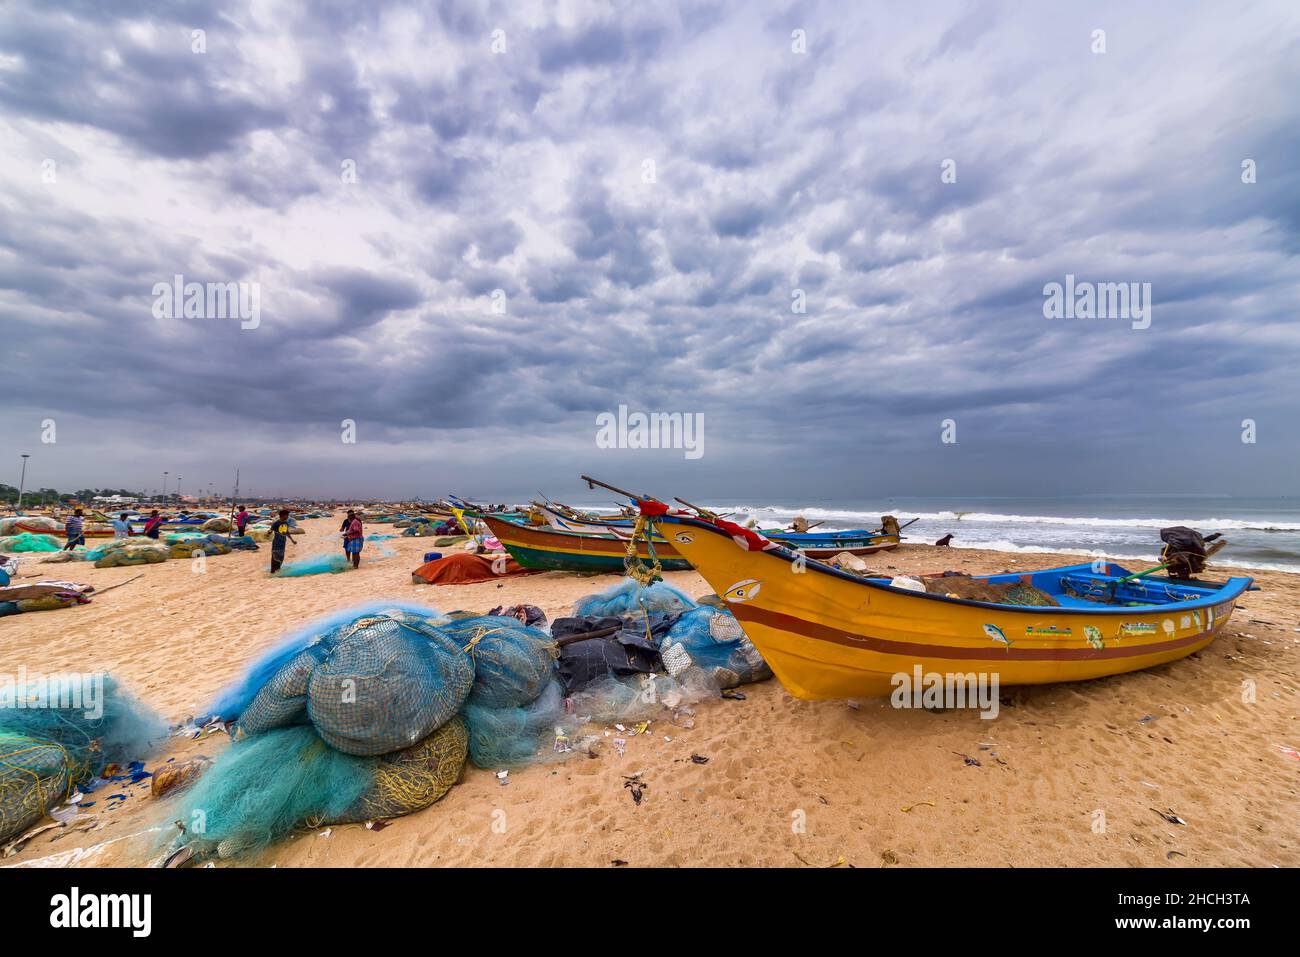 Chennai, India - August 18, 2018: View of the beach at the street fish market in Chennai. The street fish market is located near the Chennai marina Stock Photo